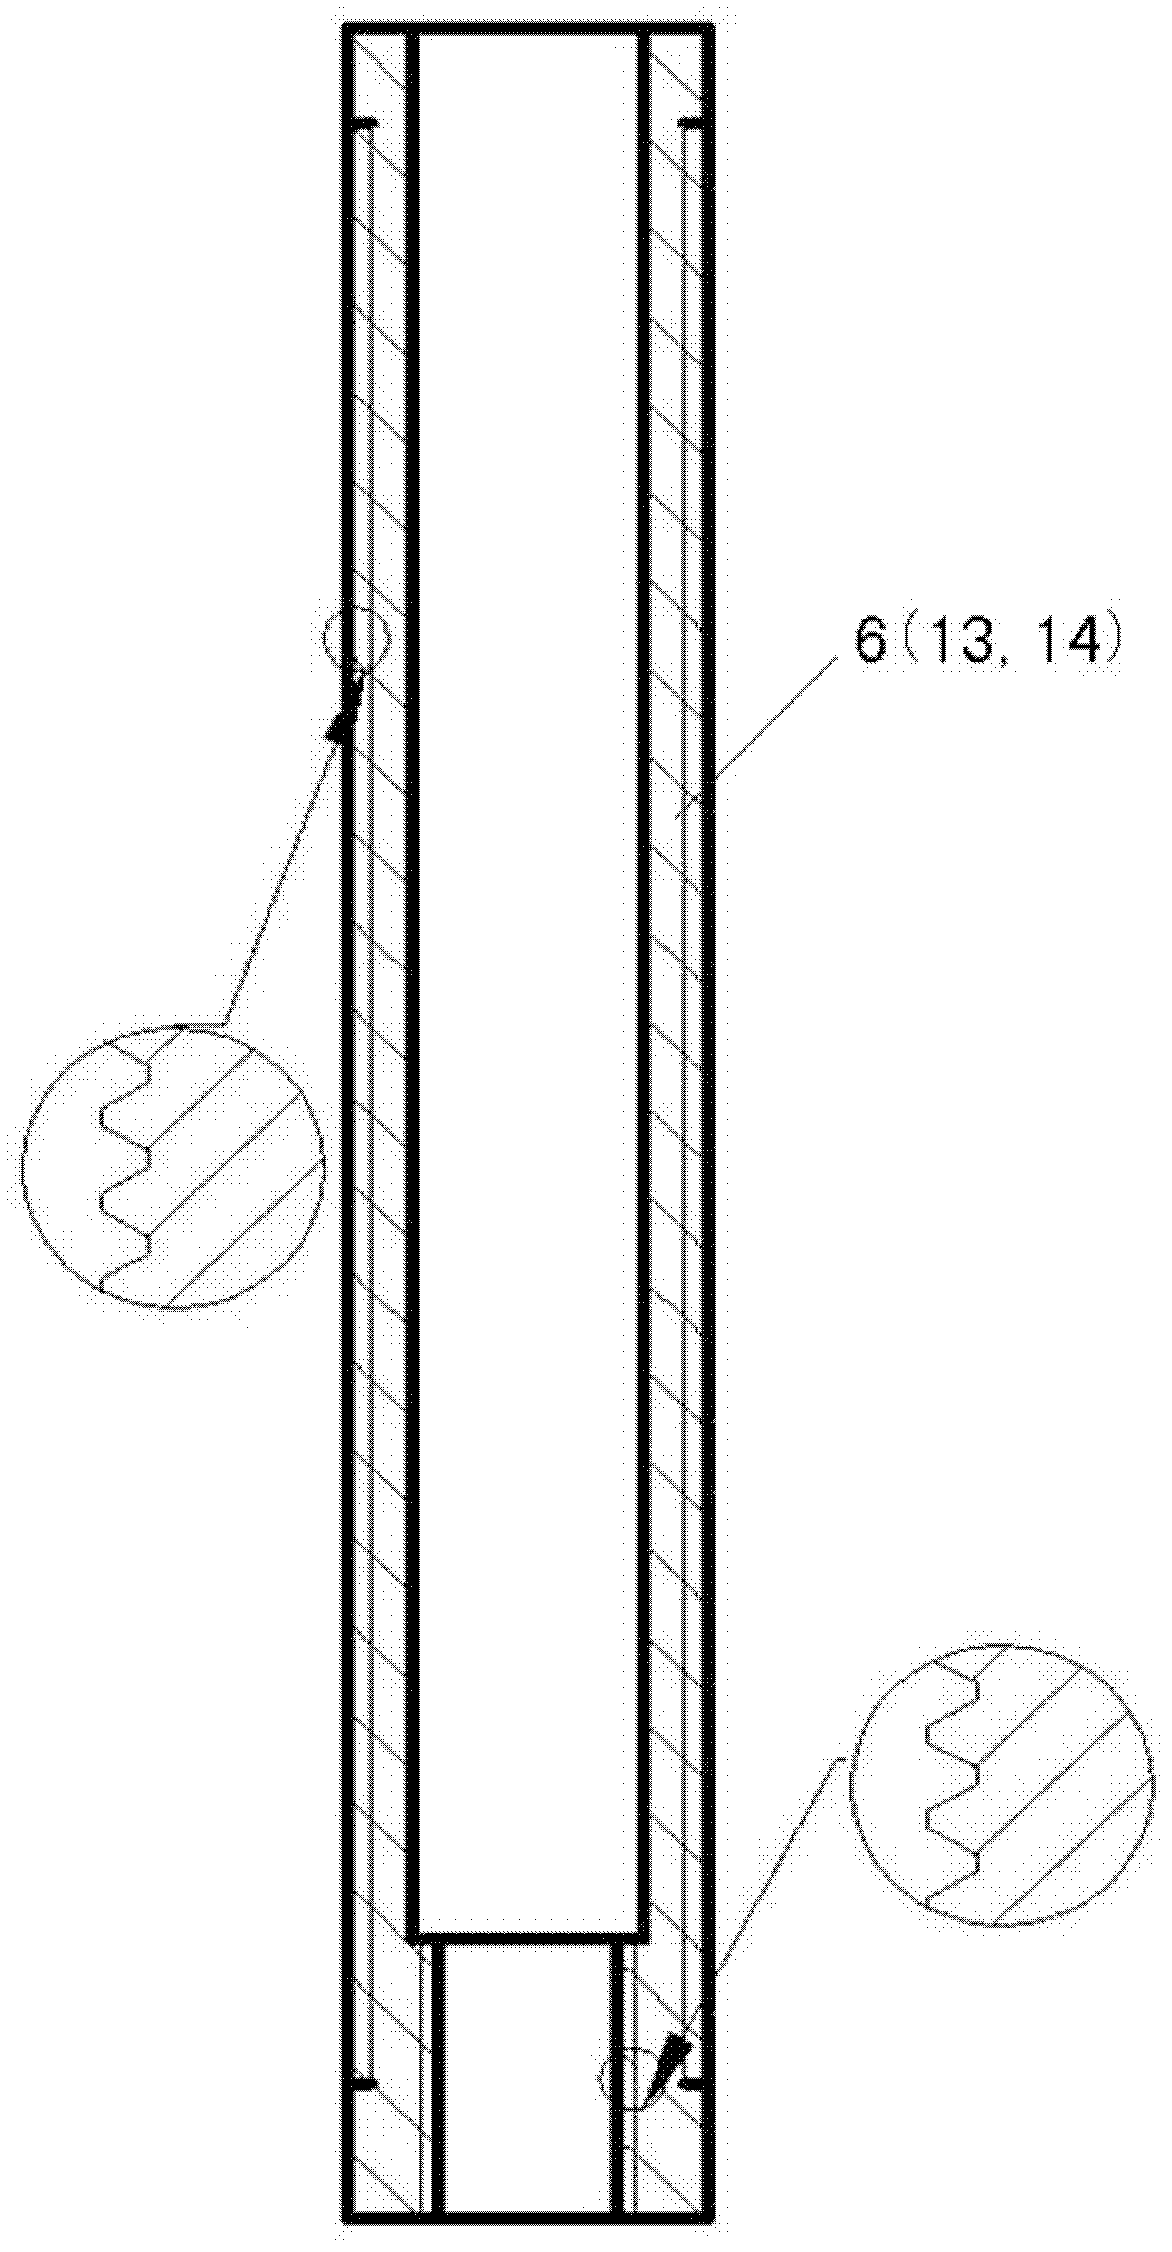 Heavy-load high-accuracy lifting device with multiple sections capable of freely extending and retracting